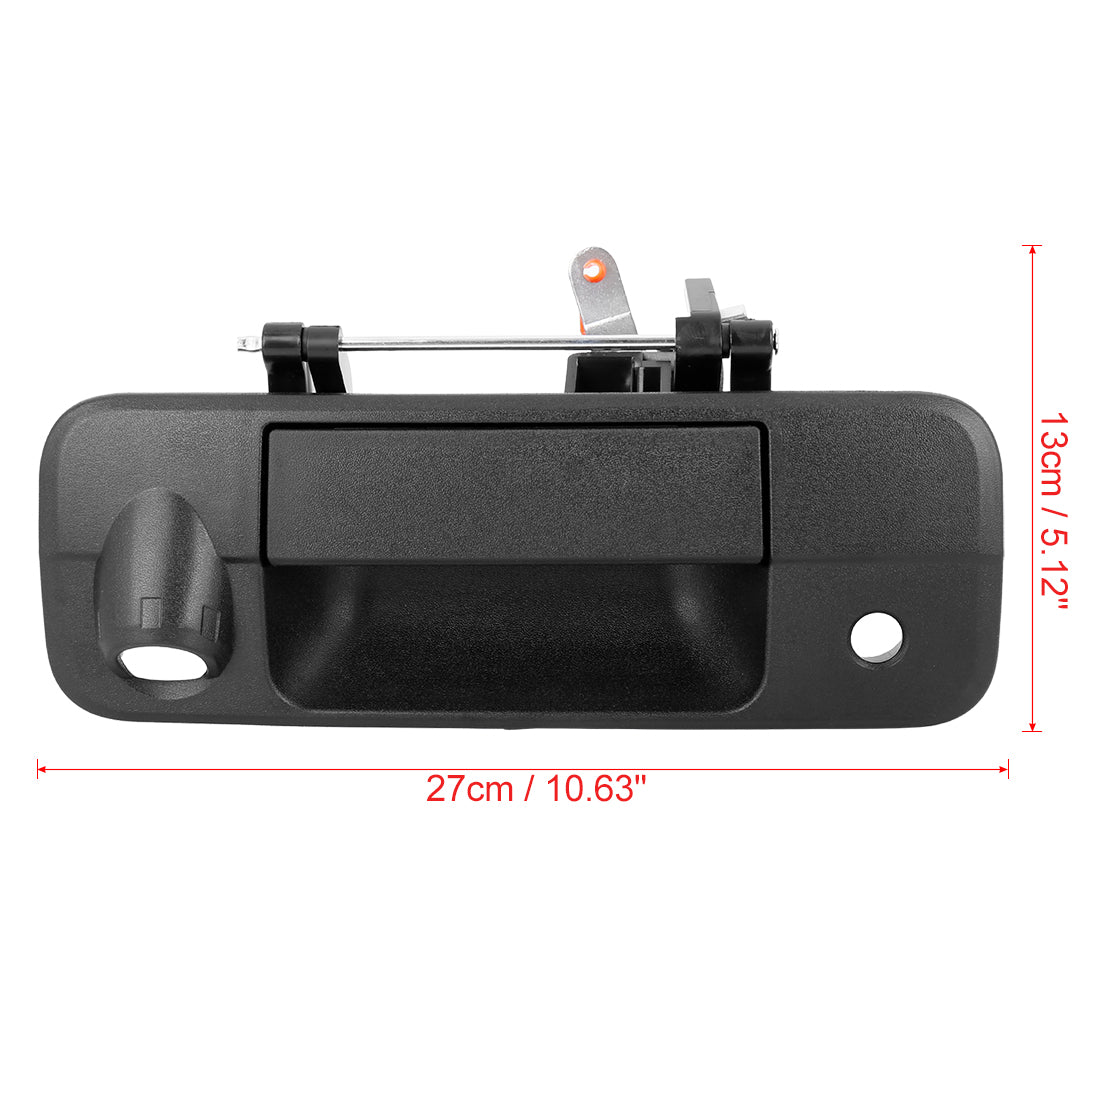 X AUTOHAUX Black Car Rear Door Liftgate Latch Tailgate Handle with Key Camera Hole Replacement for Toyota Tundra 2007-2013 690900C050 690900C051 TO191511 Tailgate Handle Liftgate Latch Handle